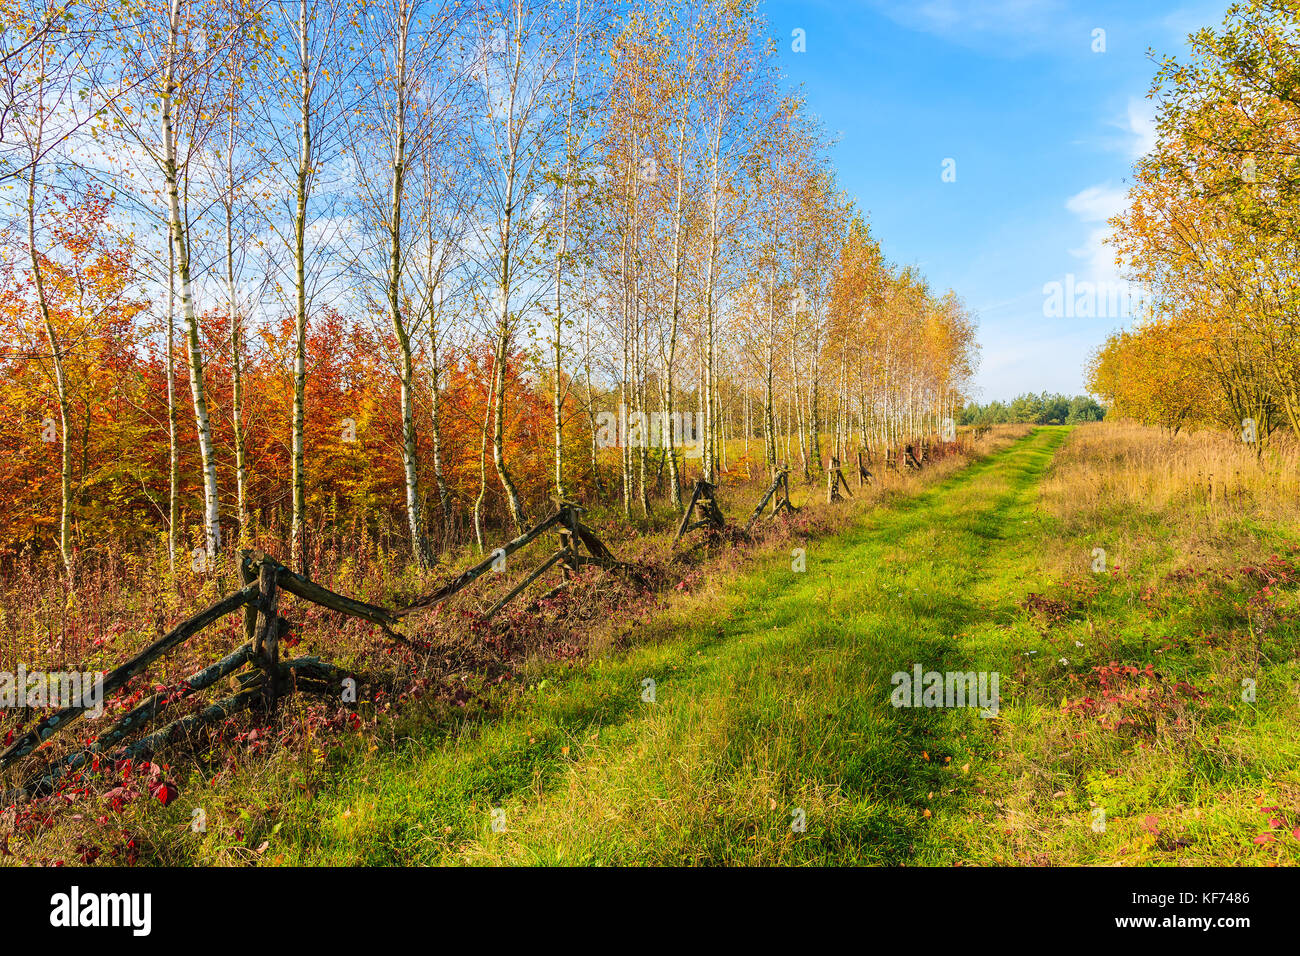 Old wooden fence and colorful birch trees along rural road in autumn season, Poland Stock Photo